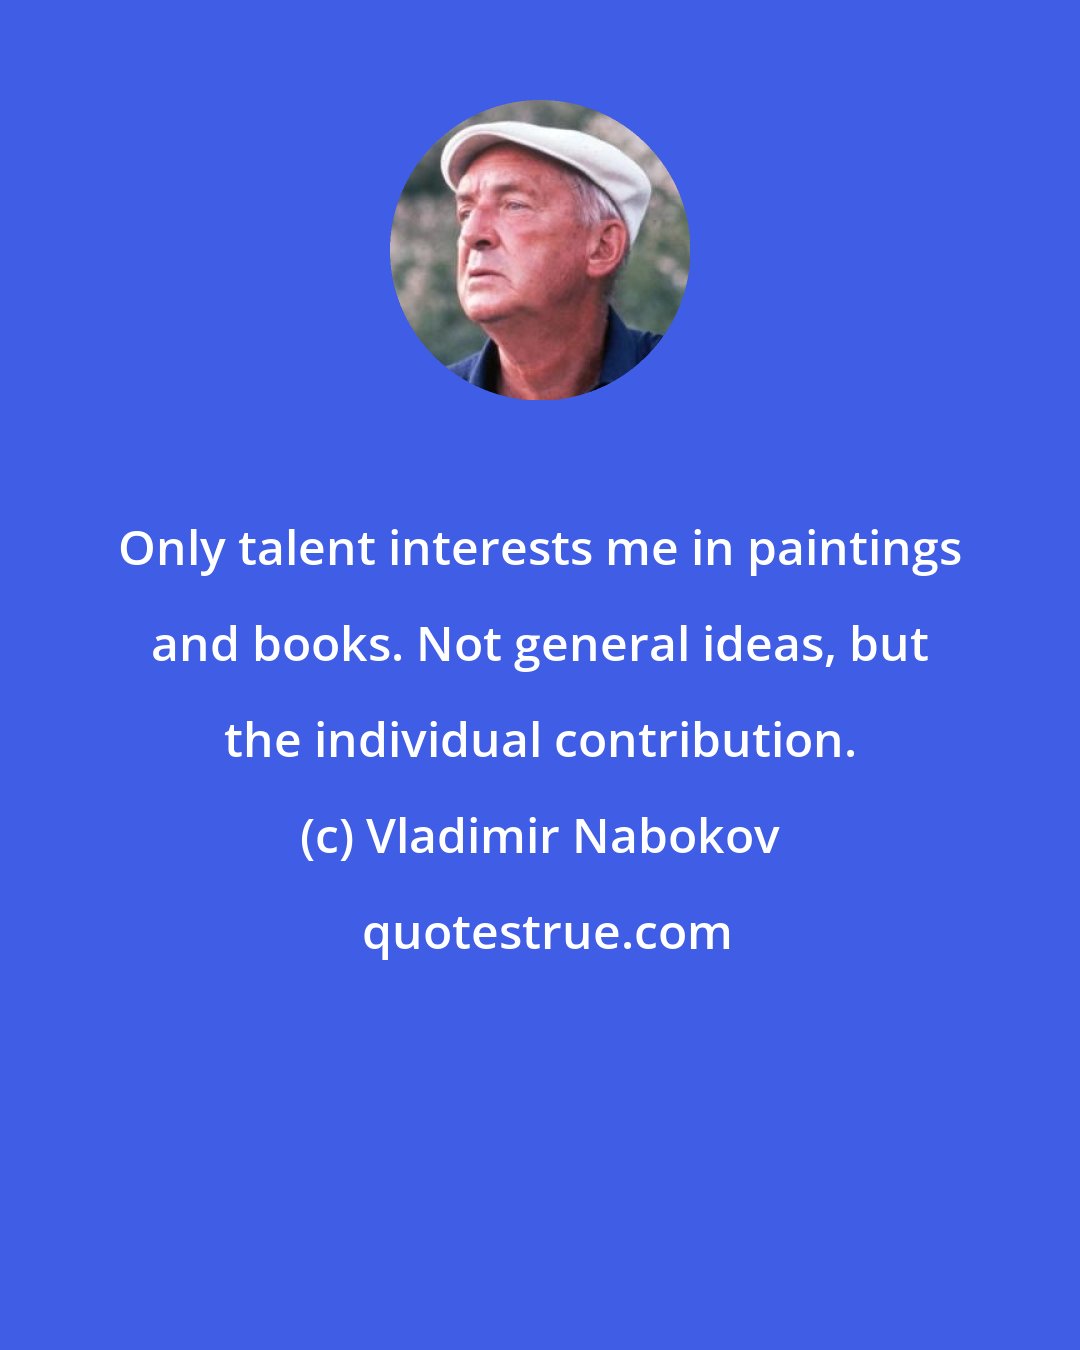 Vladimir Nabokov: Only talent interests me in paintings and books. Not general ideas, but the individual contribution.